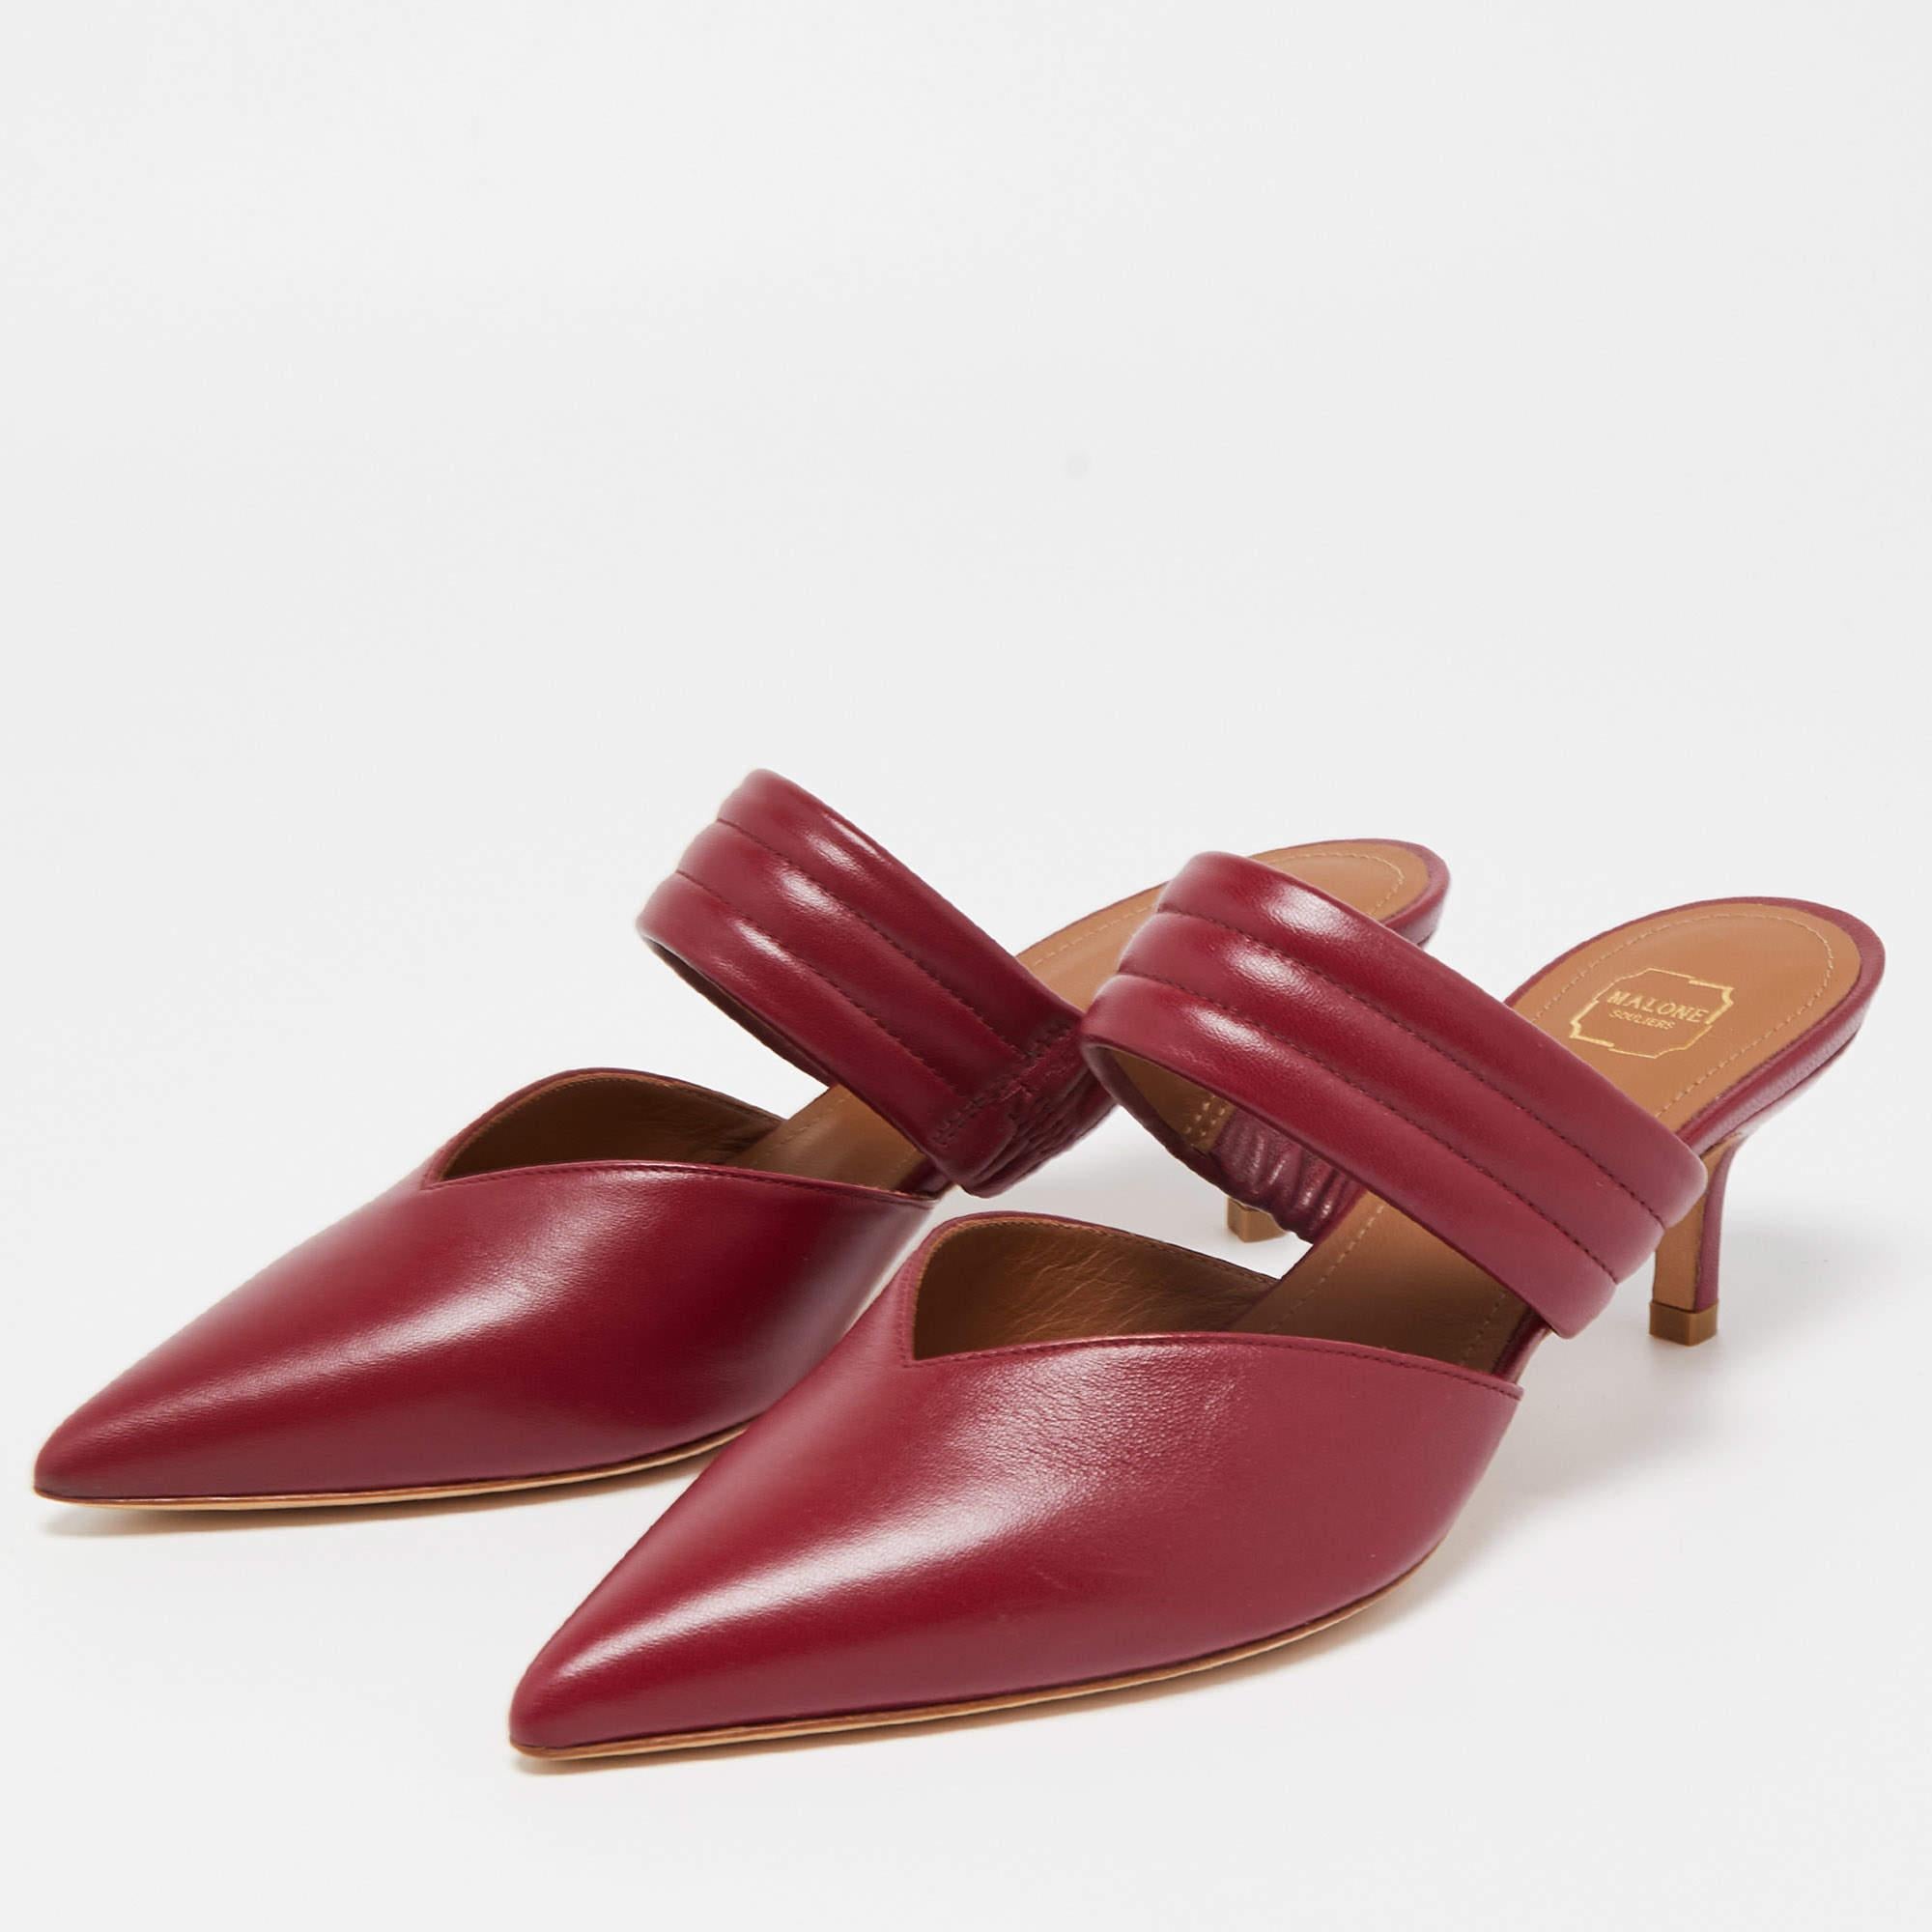 Elevate your look without compromising on comfort when you slip into these mules. Made from the finest material, the mules are perfect for any occasion and will leave you feeling confident each time you slip them on.

